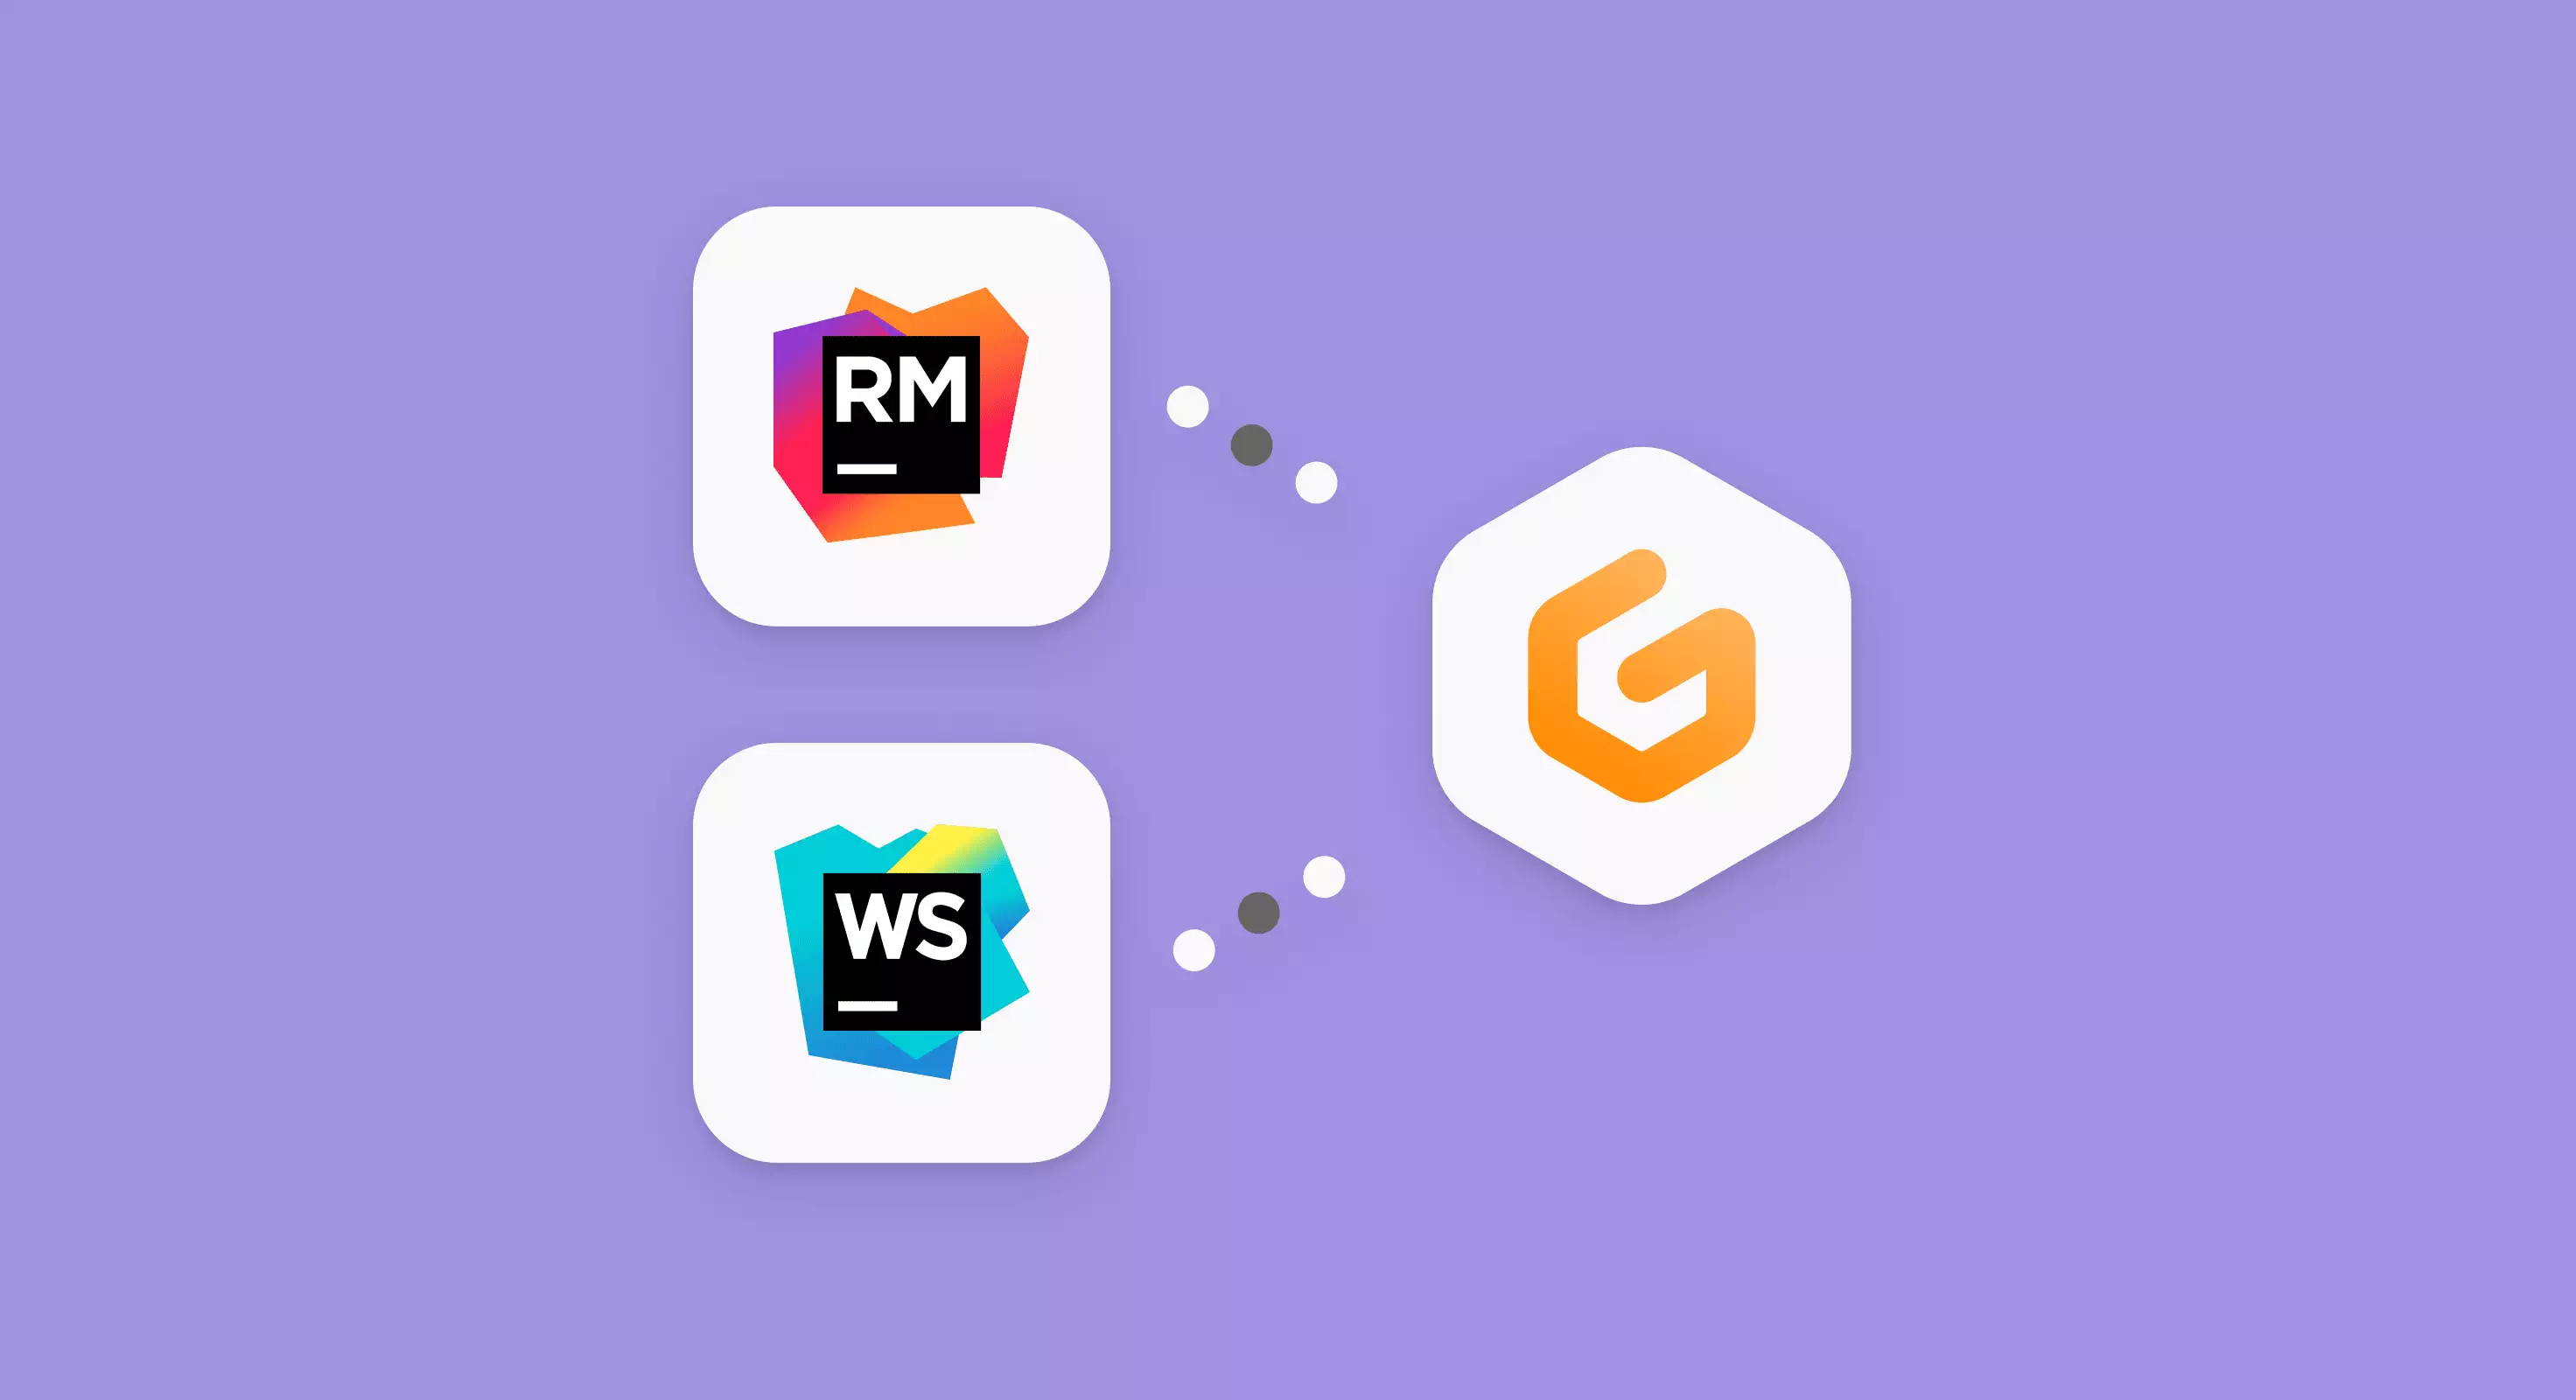 Introducing RubyMine and WebStorm support for Gitpod